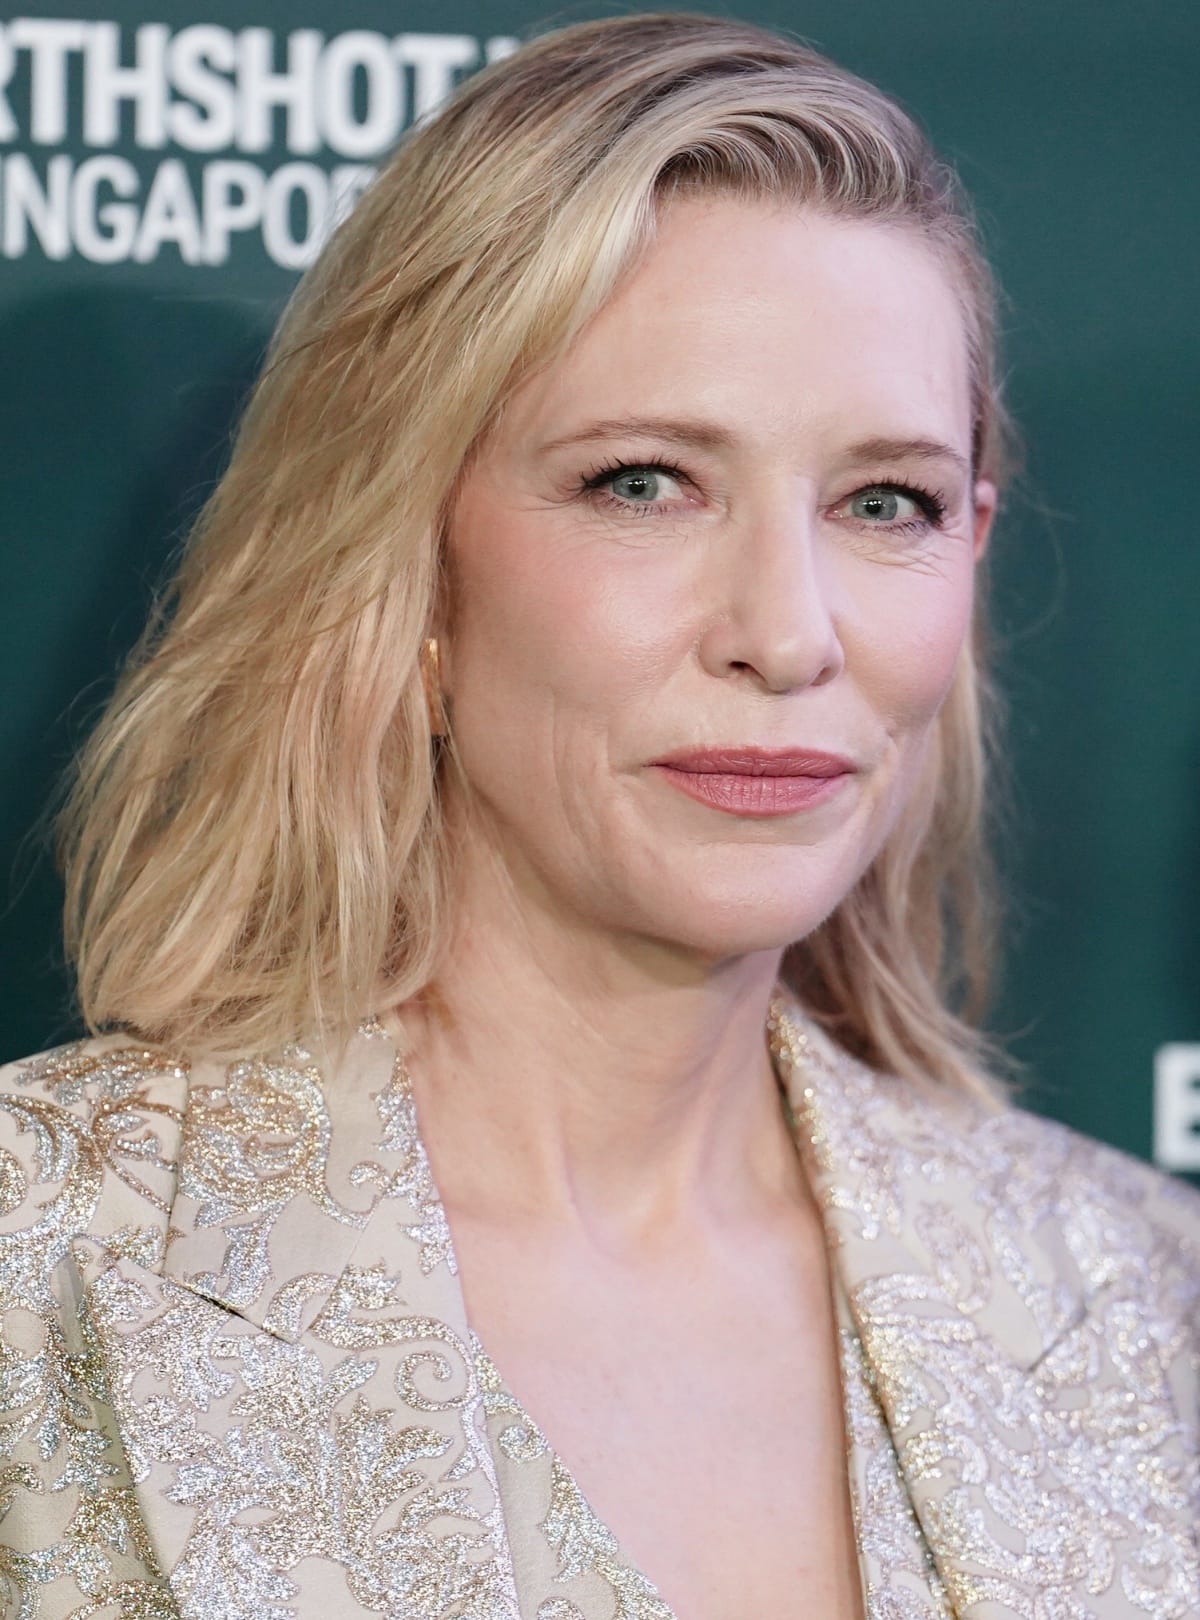 Cate Blanchett’s beauty look consisted of a natural makeup palette, minimal accessories, and a side-parted blonde bob